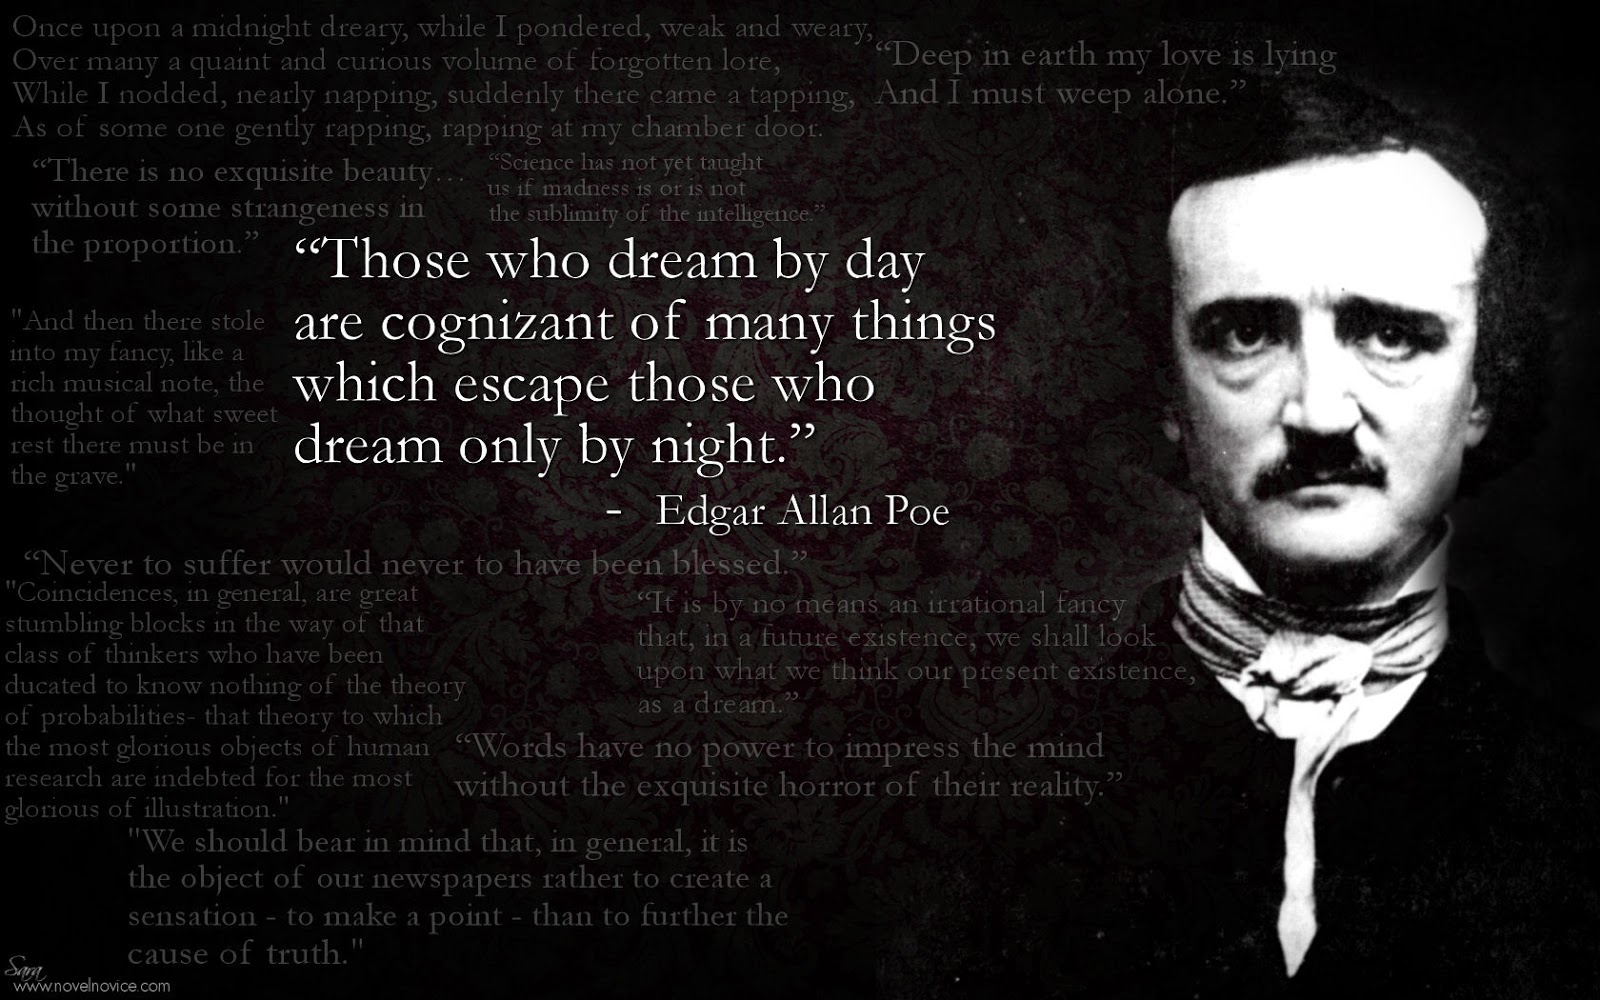 Ea Poe Quotes Insanity Quotesgram HD Wallpapers Download Free Map Images Wallpaper [wallpaper376.blogspot.com]